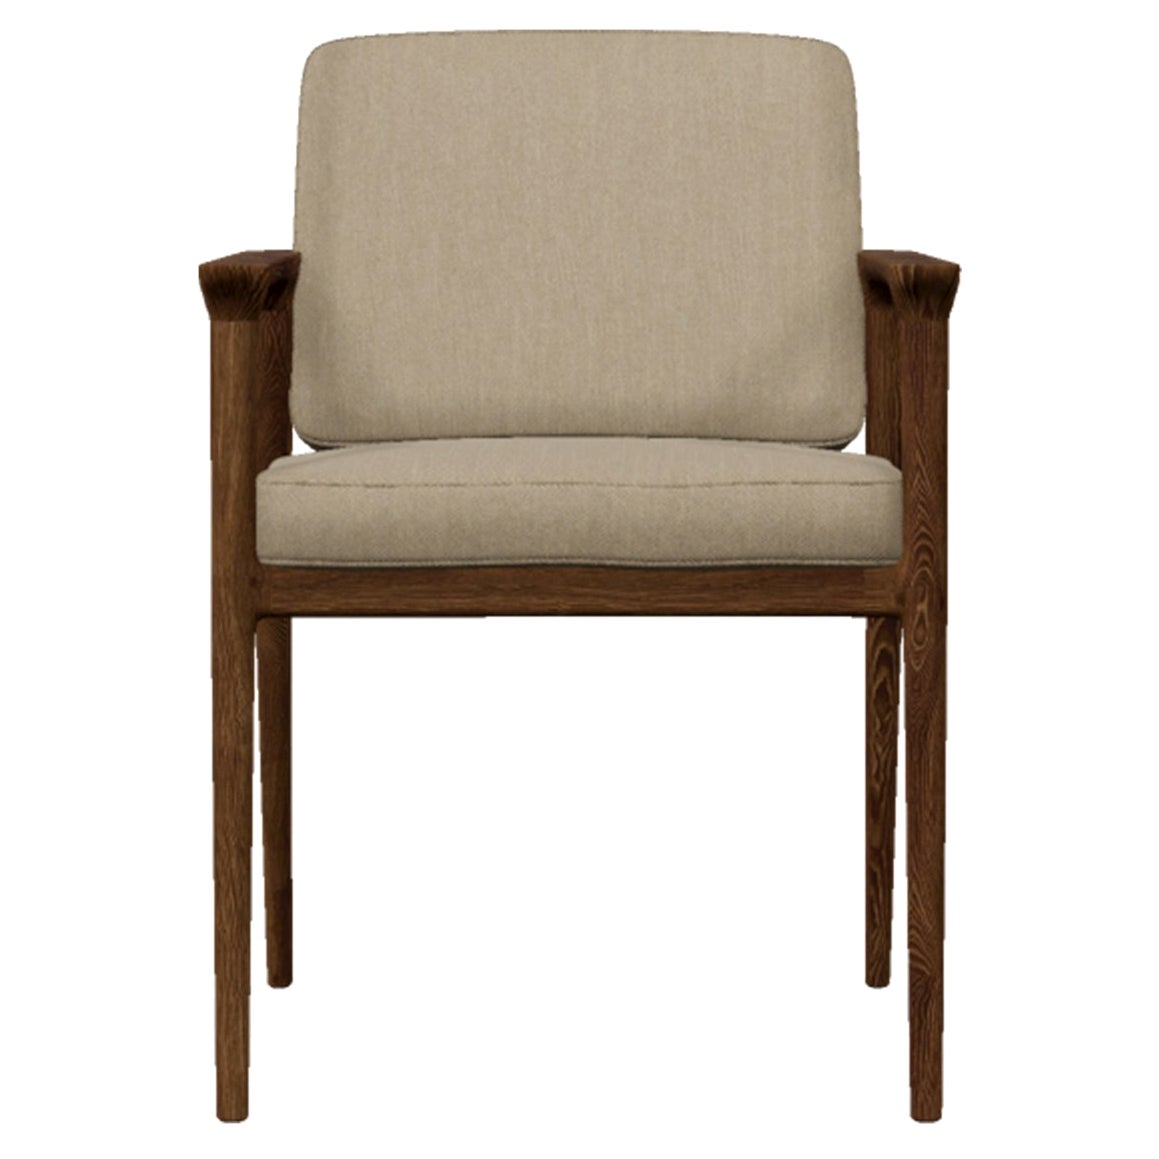 Moooi Zio Dining Chair in Oray Ronan Upholstery with Oak Stained Cinnamon Frame For Sale